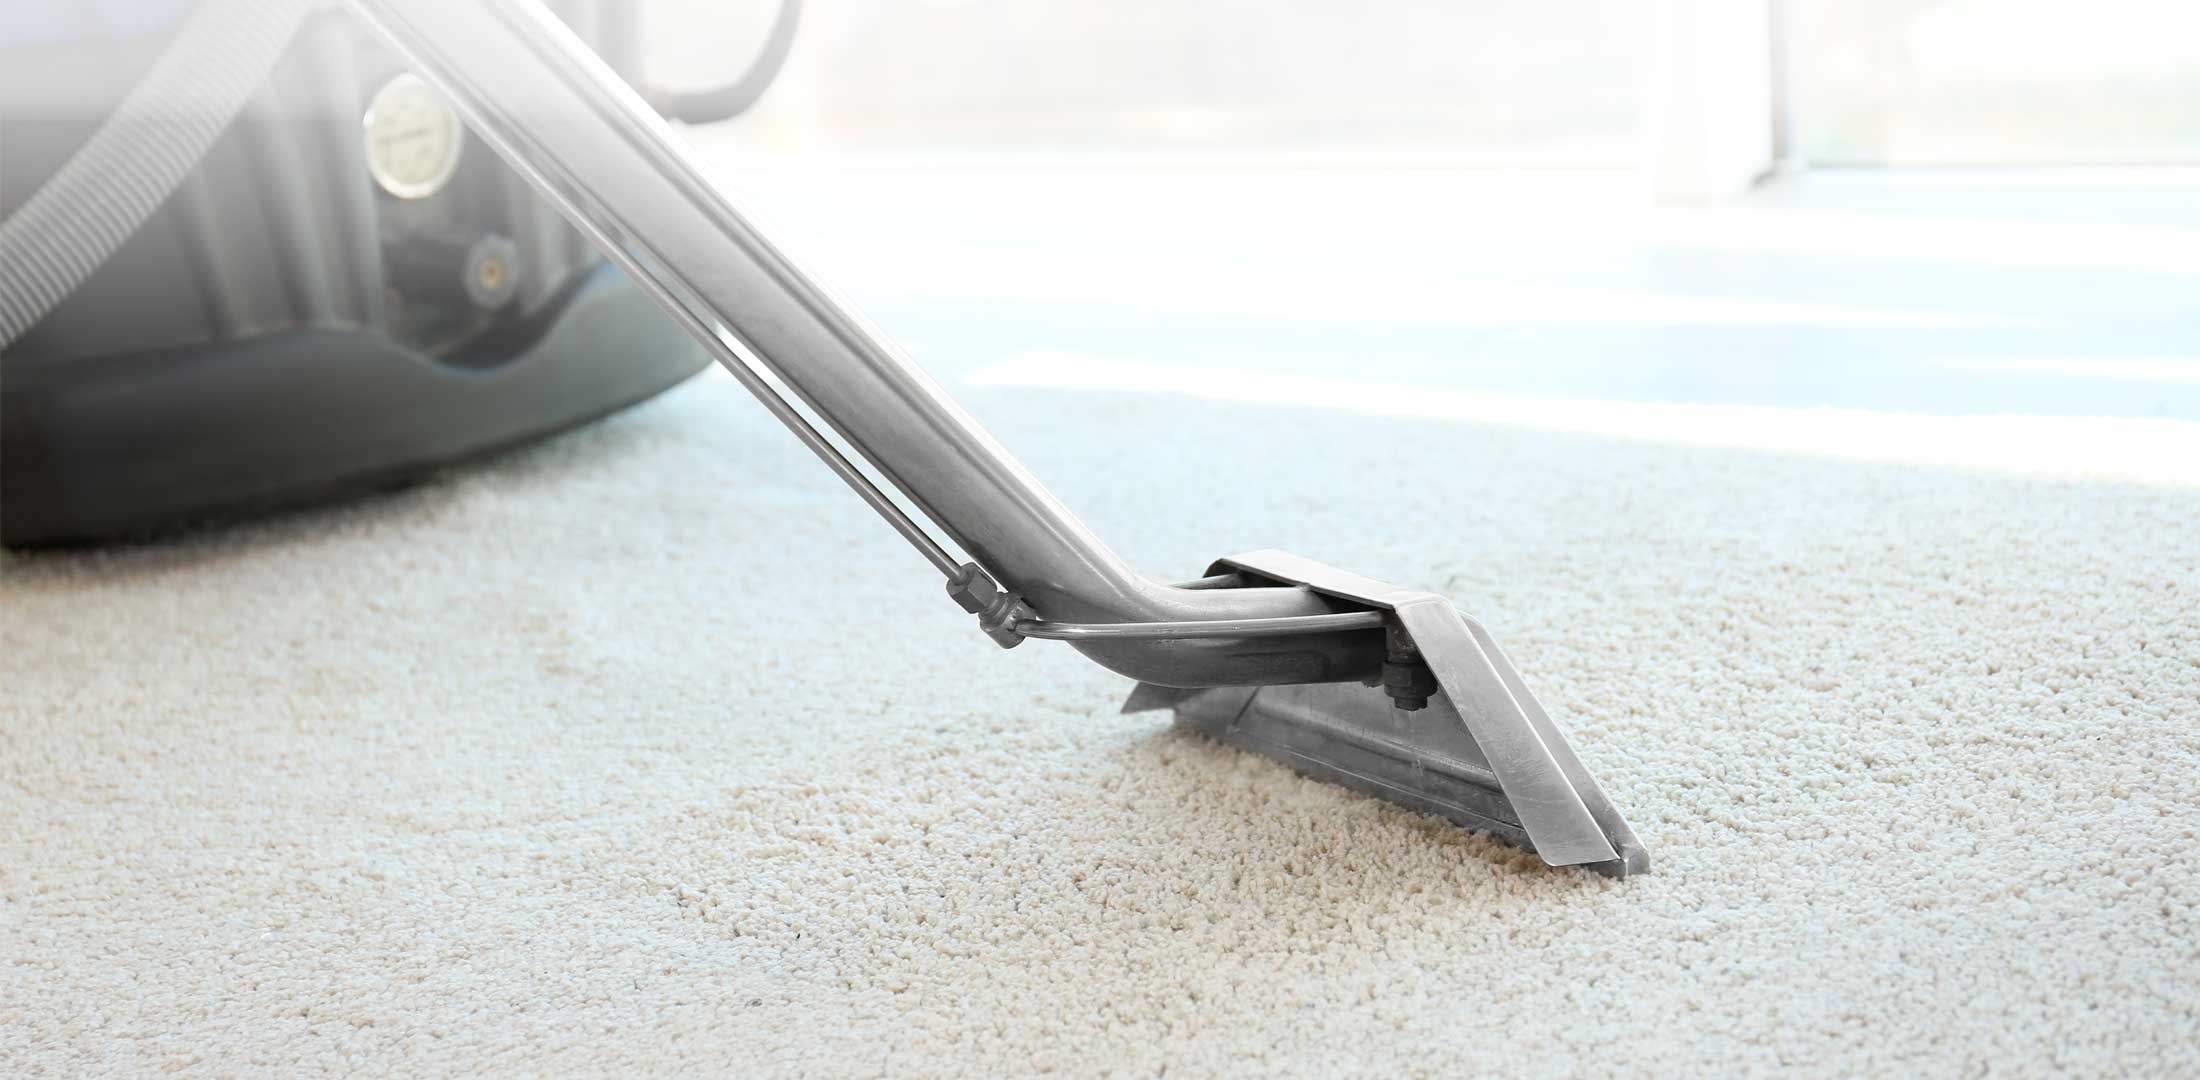 Carpet & Upholstery Cleaning Services